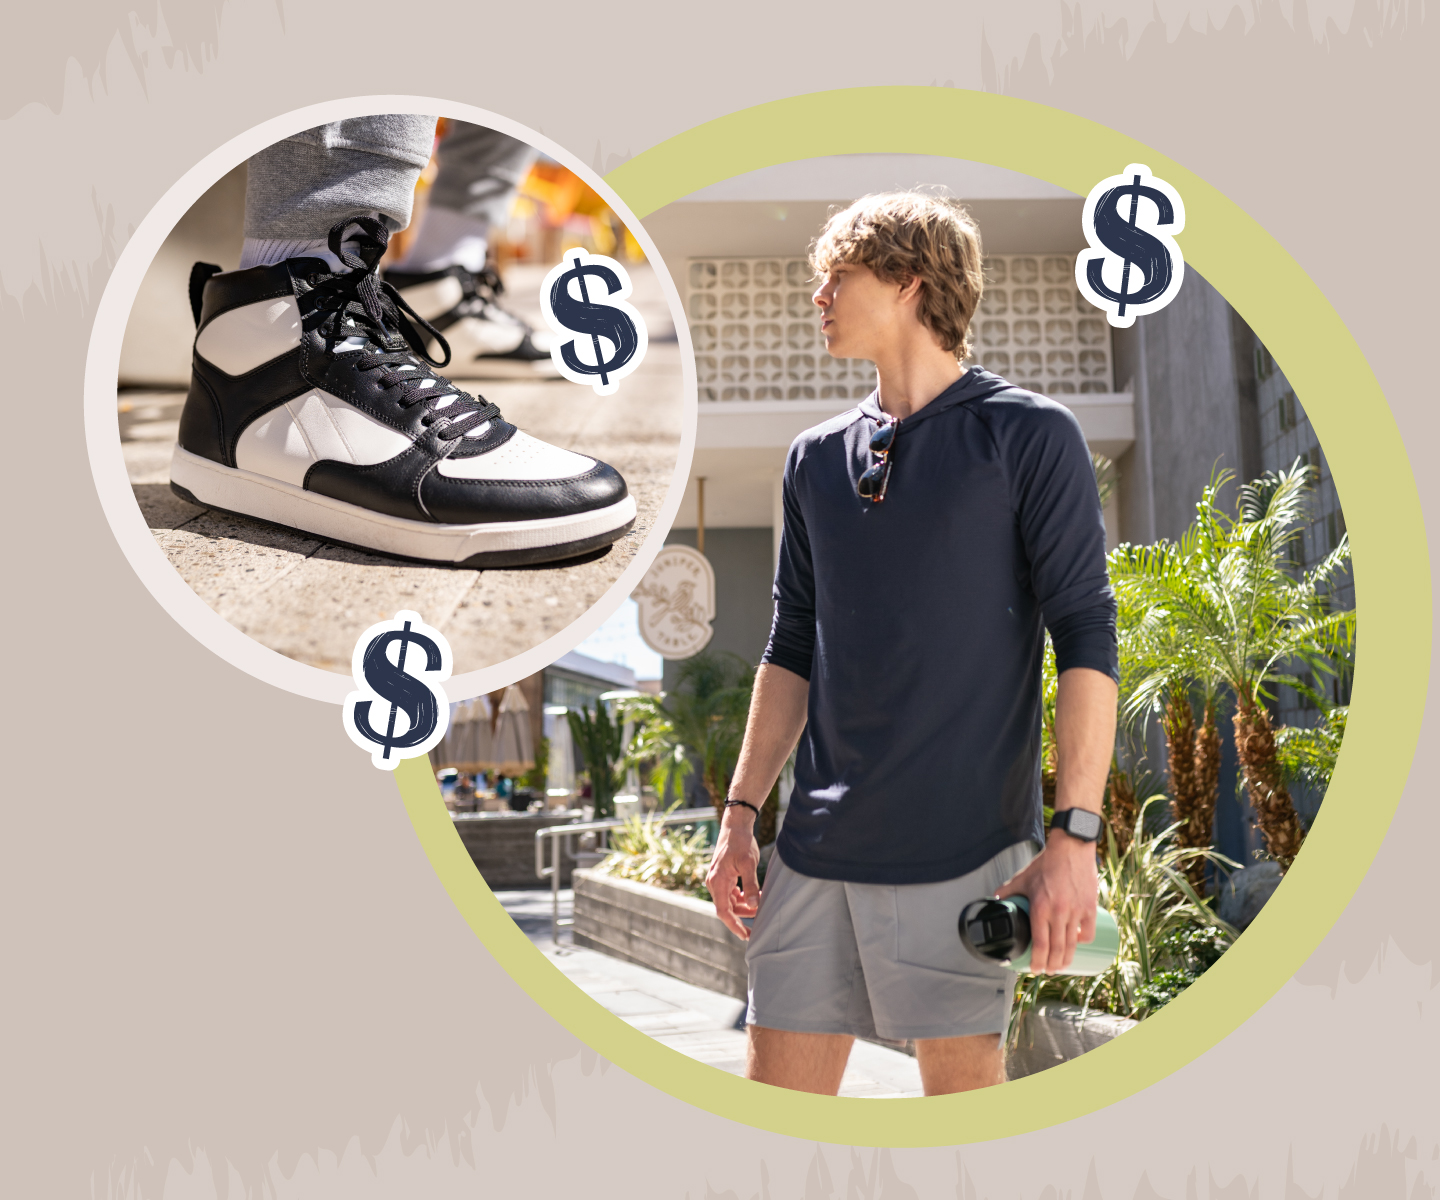 Get cash for guys' trends